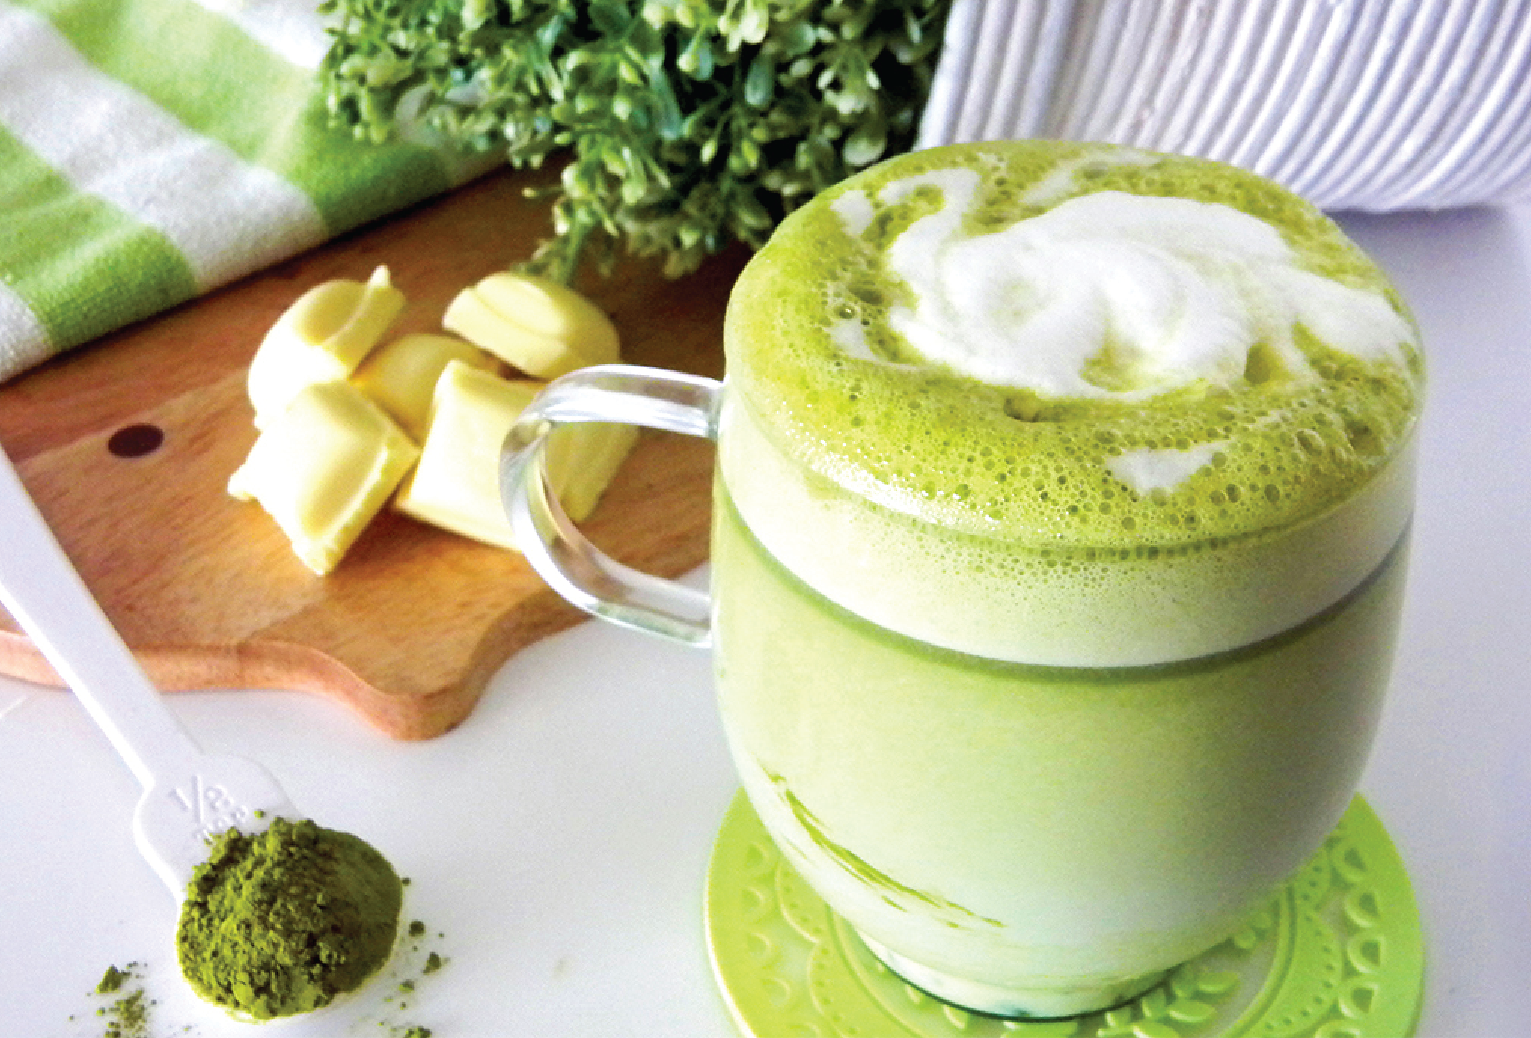 MATCHA - Special green tea from Japan.